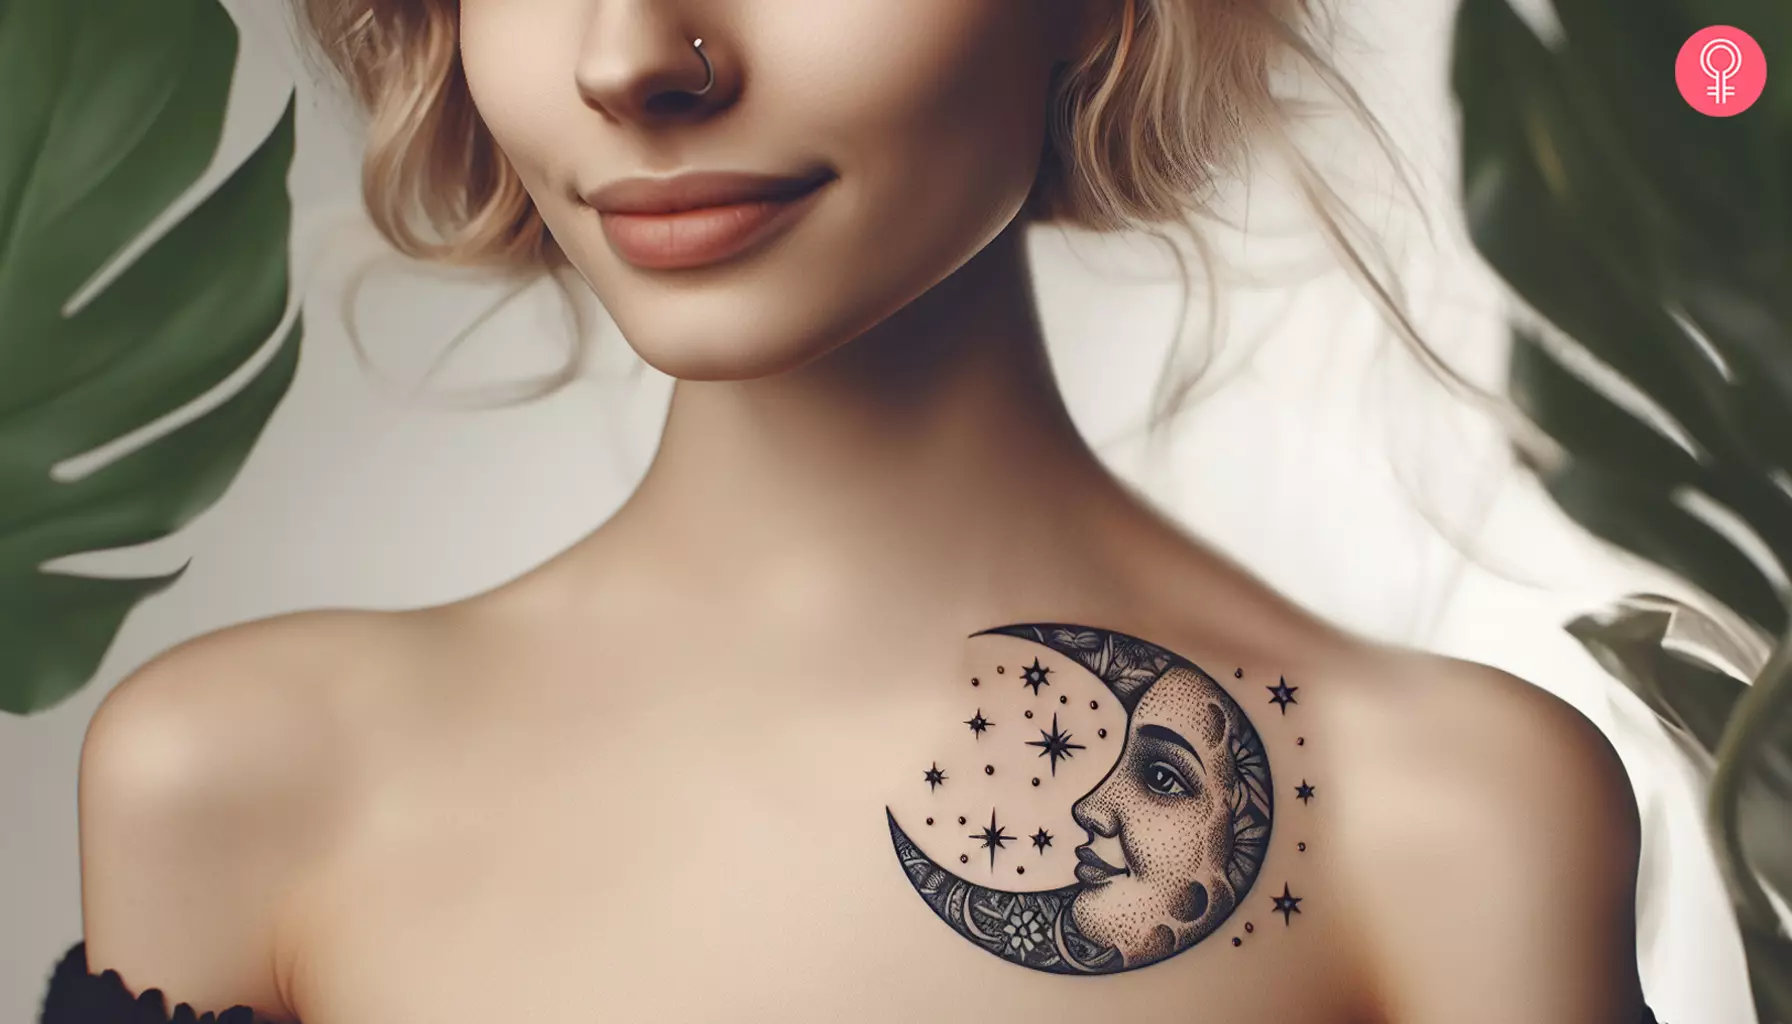 A tattoo of the moon and stars on the collarbone